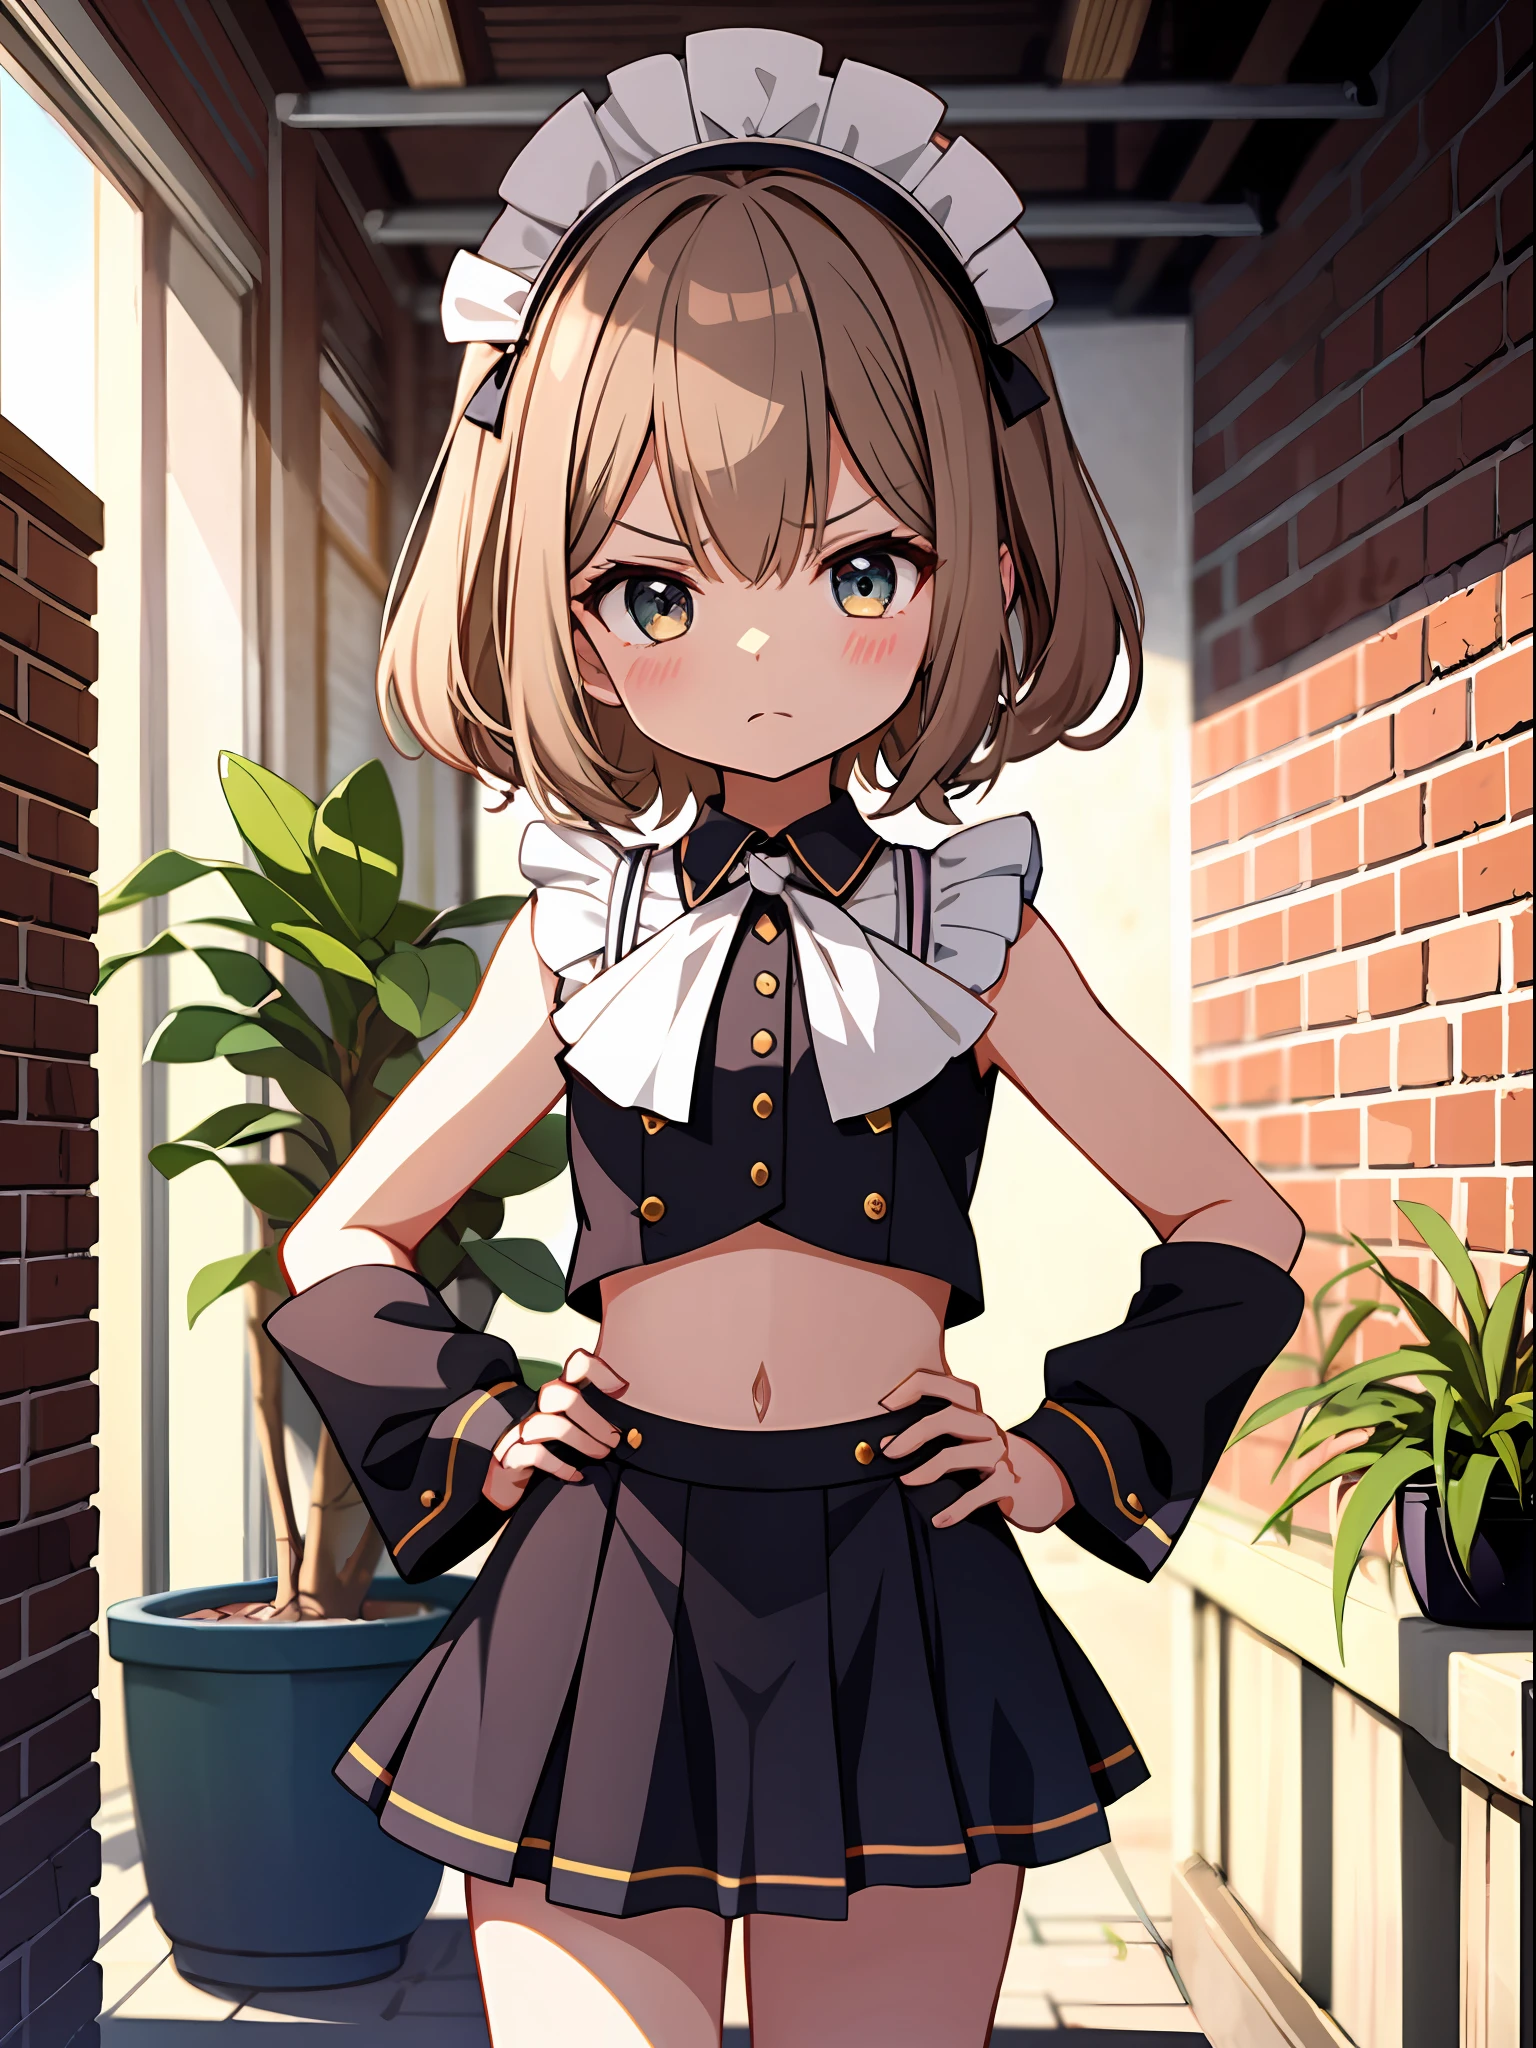 (slightly angry) expression, (Fantasy Store: 1.3), soft morning sun, fragrance, brick wall, hanging plants, relaxed atmosphere, weekend atmosphere. runt
break
(top quality, masterpiece, 8K, very detailed), (1 girl: 1.5), (loli: 1.3), blush, (examine: 1.2),
(Miniskirt: 1.2), (Bikini Maid Costume: 1.3),
(Platinum Brown Hair), Beauty Eyes, (Eyeshadow: 1.1), Glossy Skin, (Mascara: 1.0), (Medium: 1.2), (Under: 1.2), Blake, (((loli)),
(from the front: 1.8), (cowboy shot: 1.3), (bent over), (standing: 1.1), (pose with hands on the hips: 1.1),
naked
Ultra High Resolution, Absurdity, (Highly Detailed Background: 1.1), Official Art, Dramatic Lighting, IQ20000,